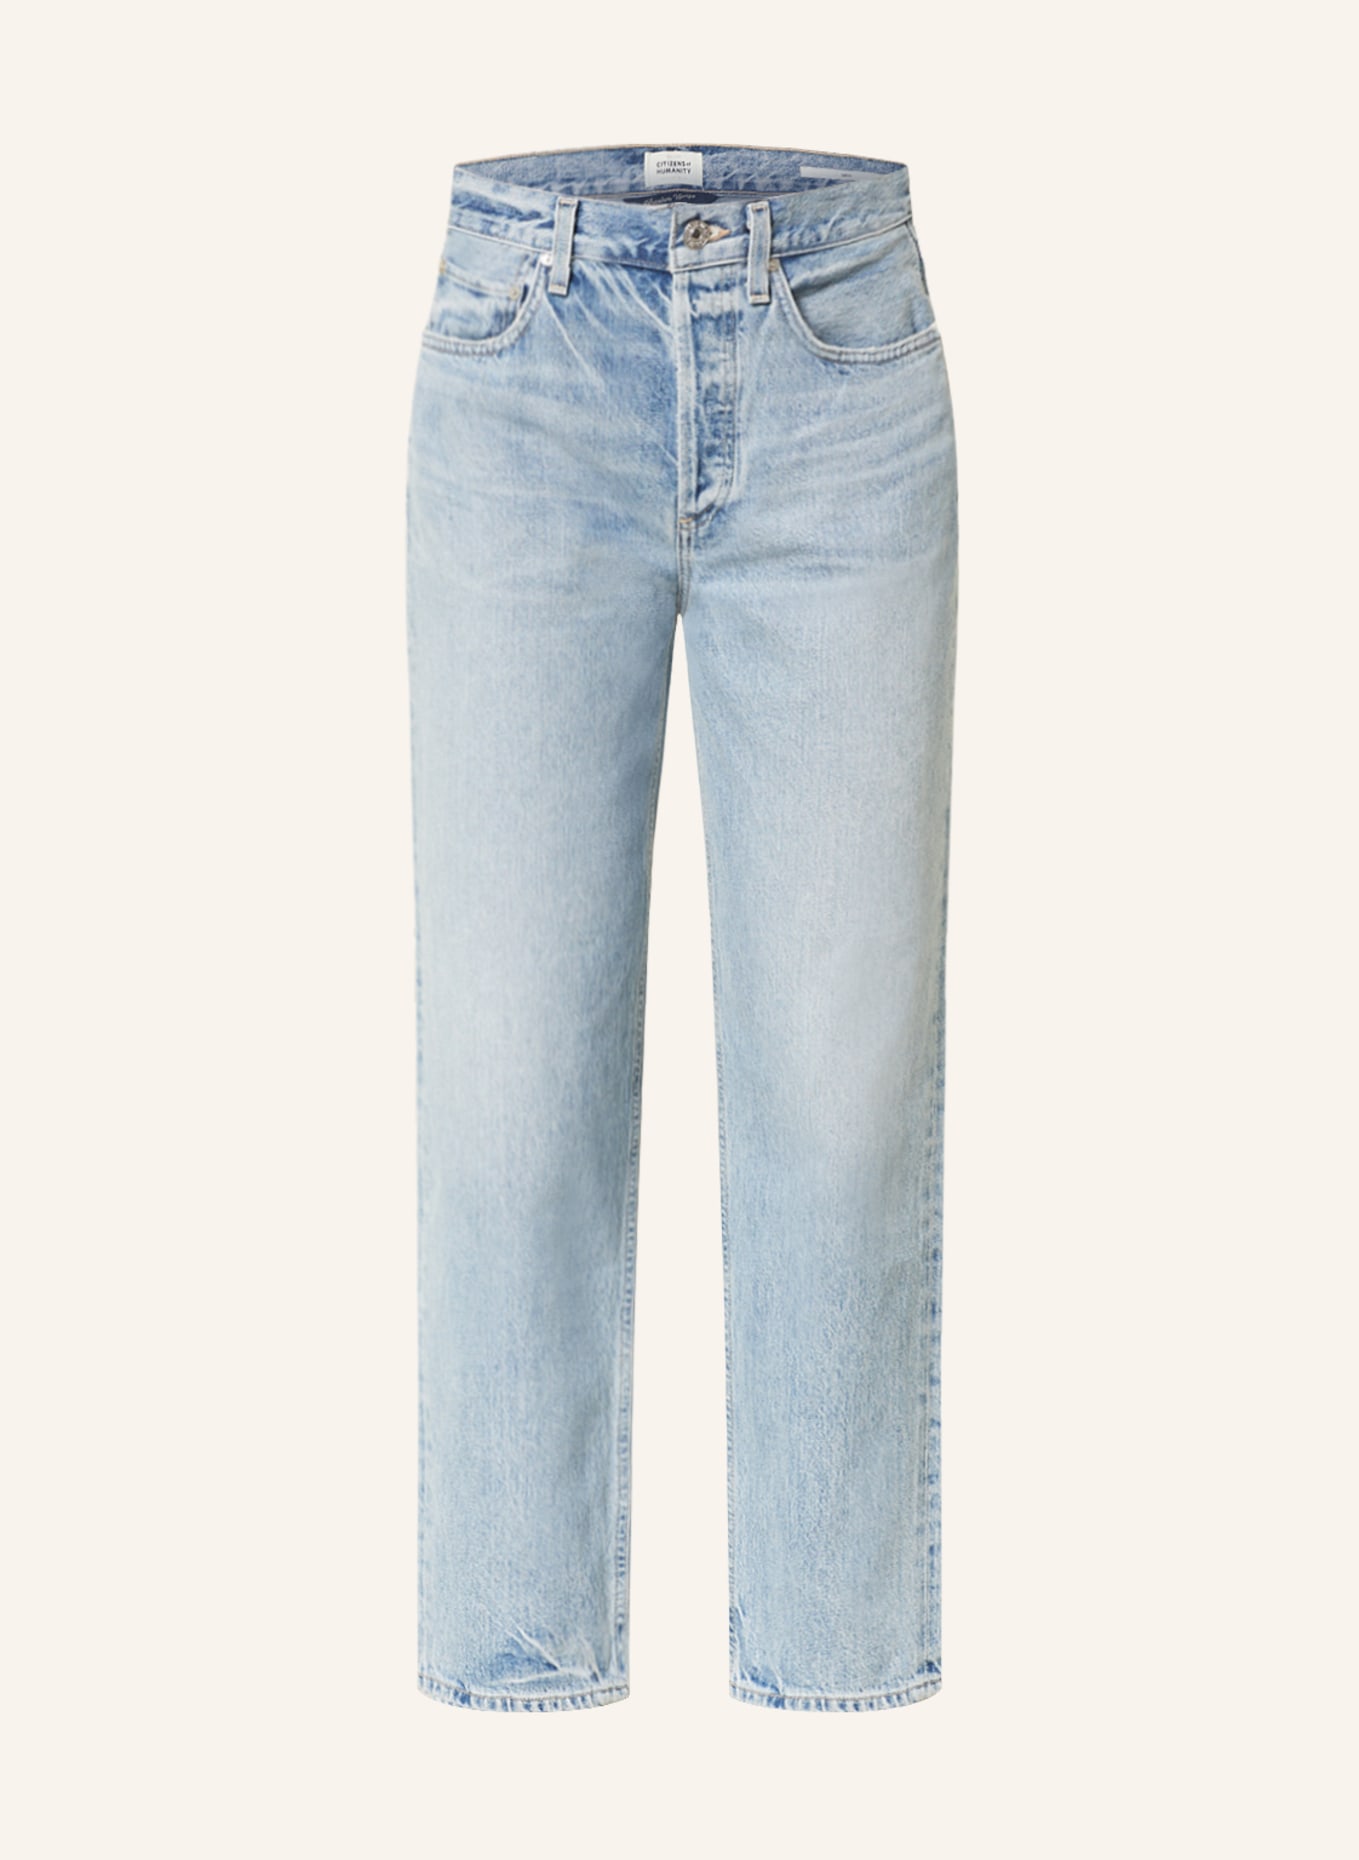 CITIZENS of HUMANITY Jeans DEVI, Color: Weatherly md indigo (Image 1)